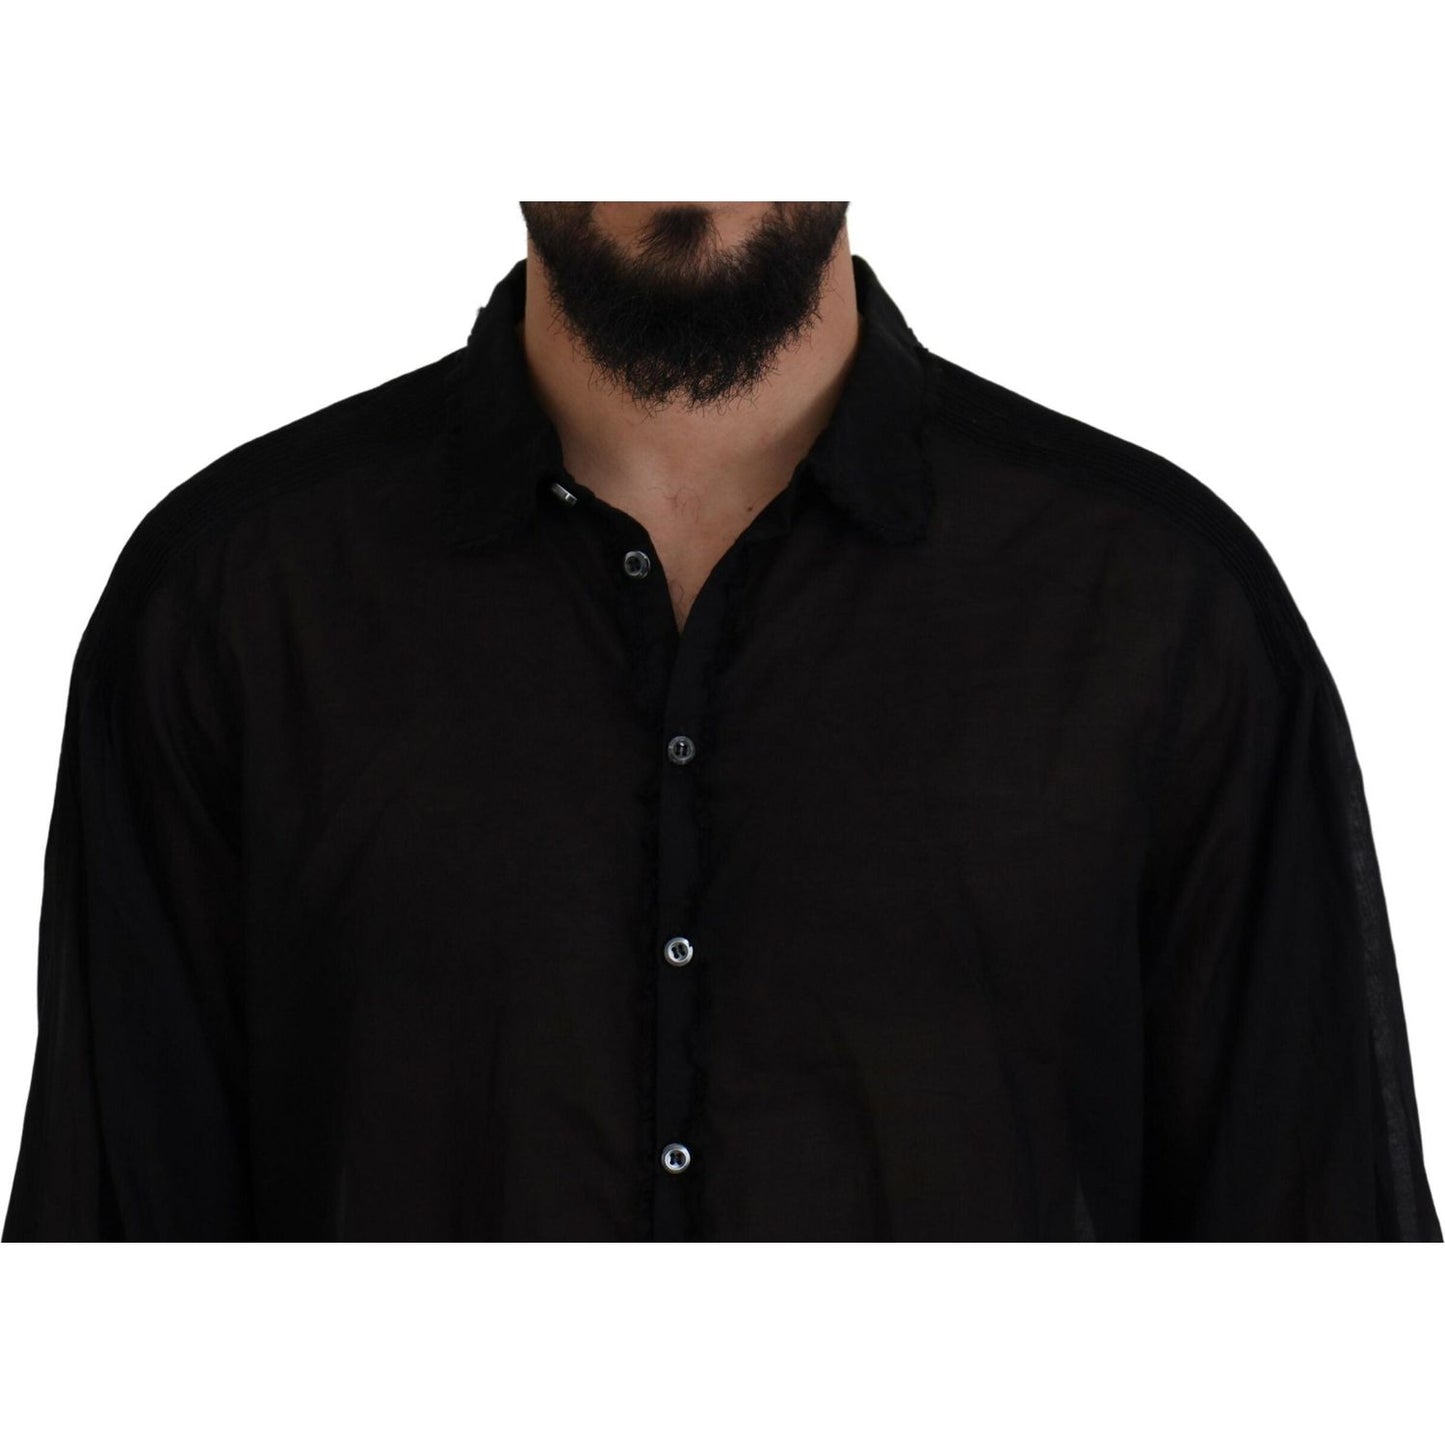 Dsquared² Black Cotton Collared Long Sleeves Formal Shirt black-cotton-collared-long-sleeves-formal-shirt